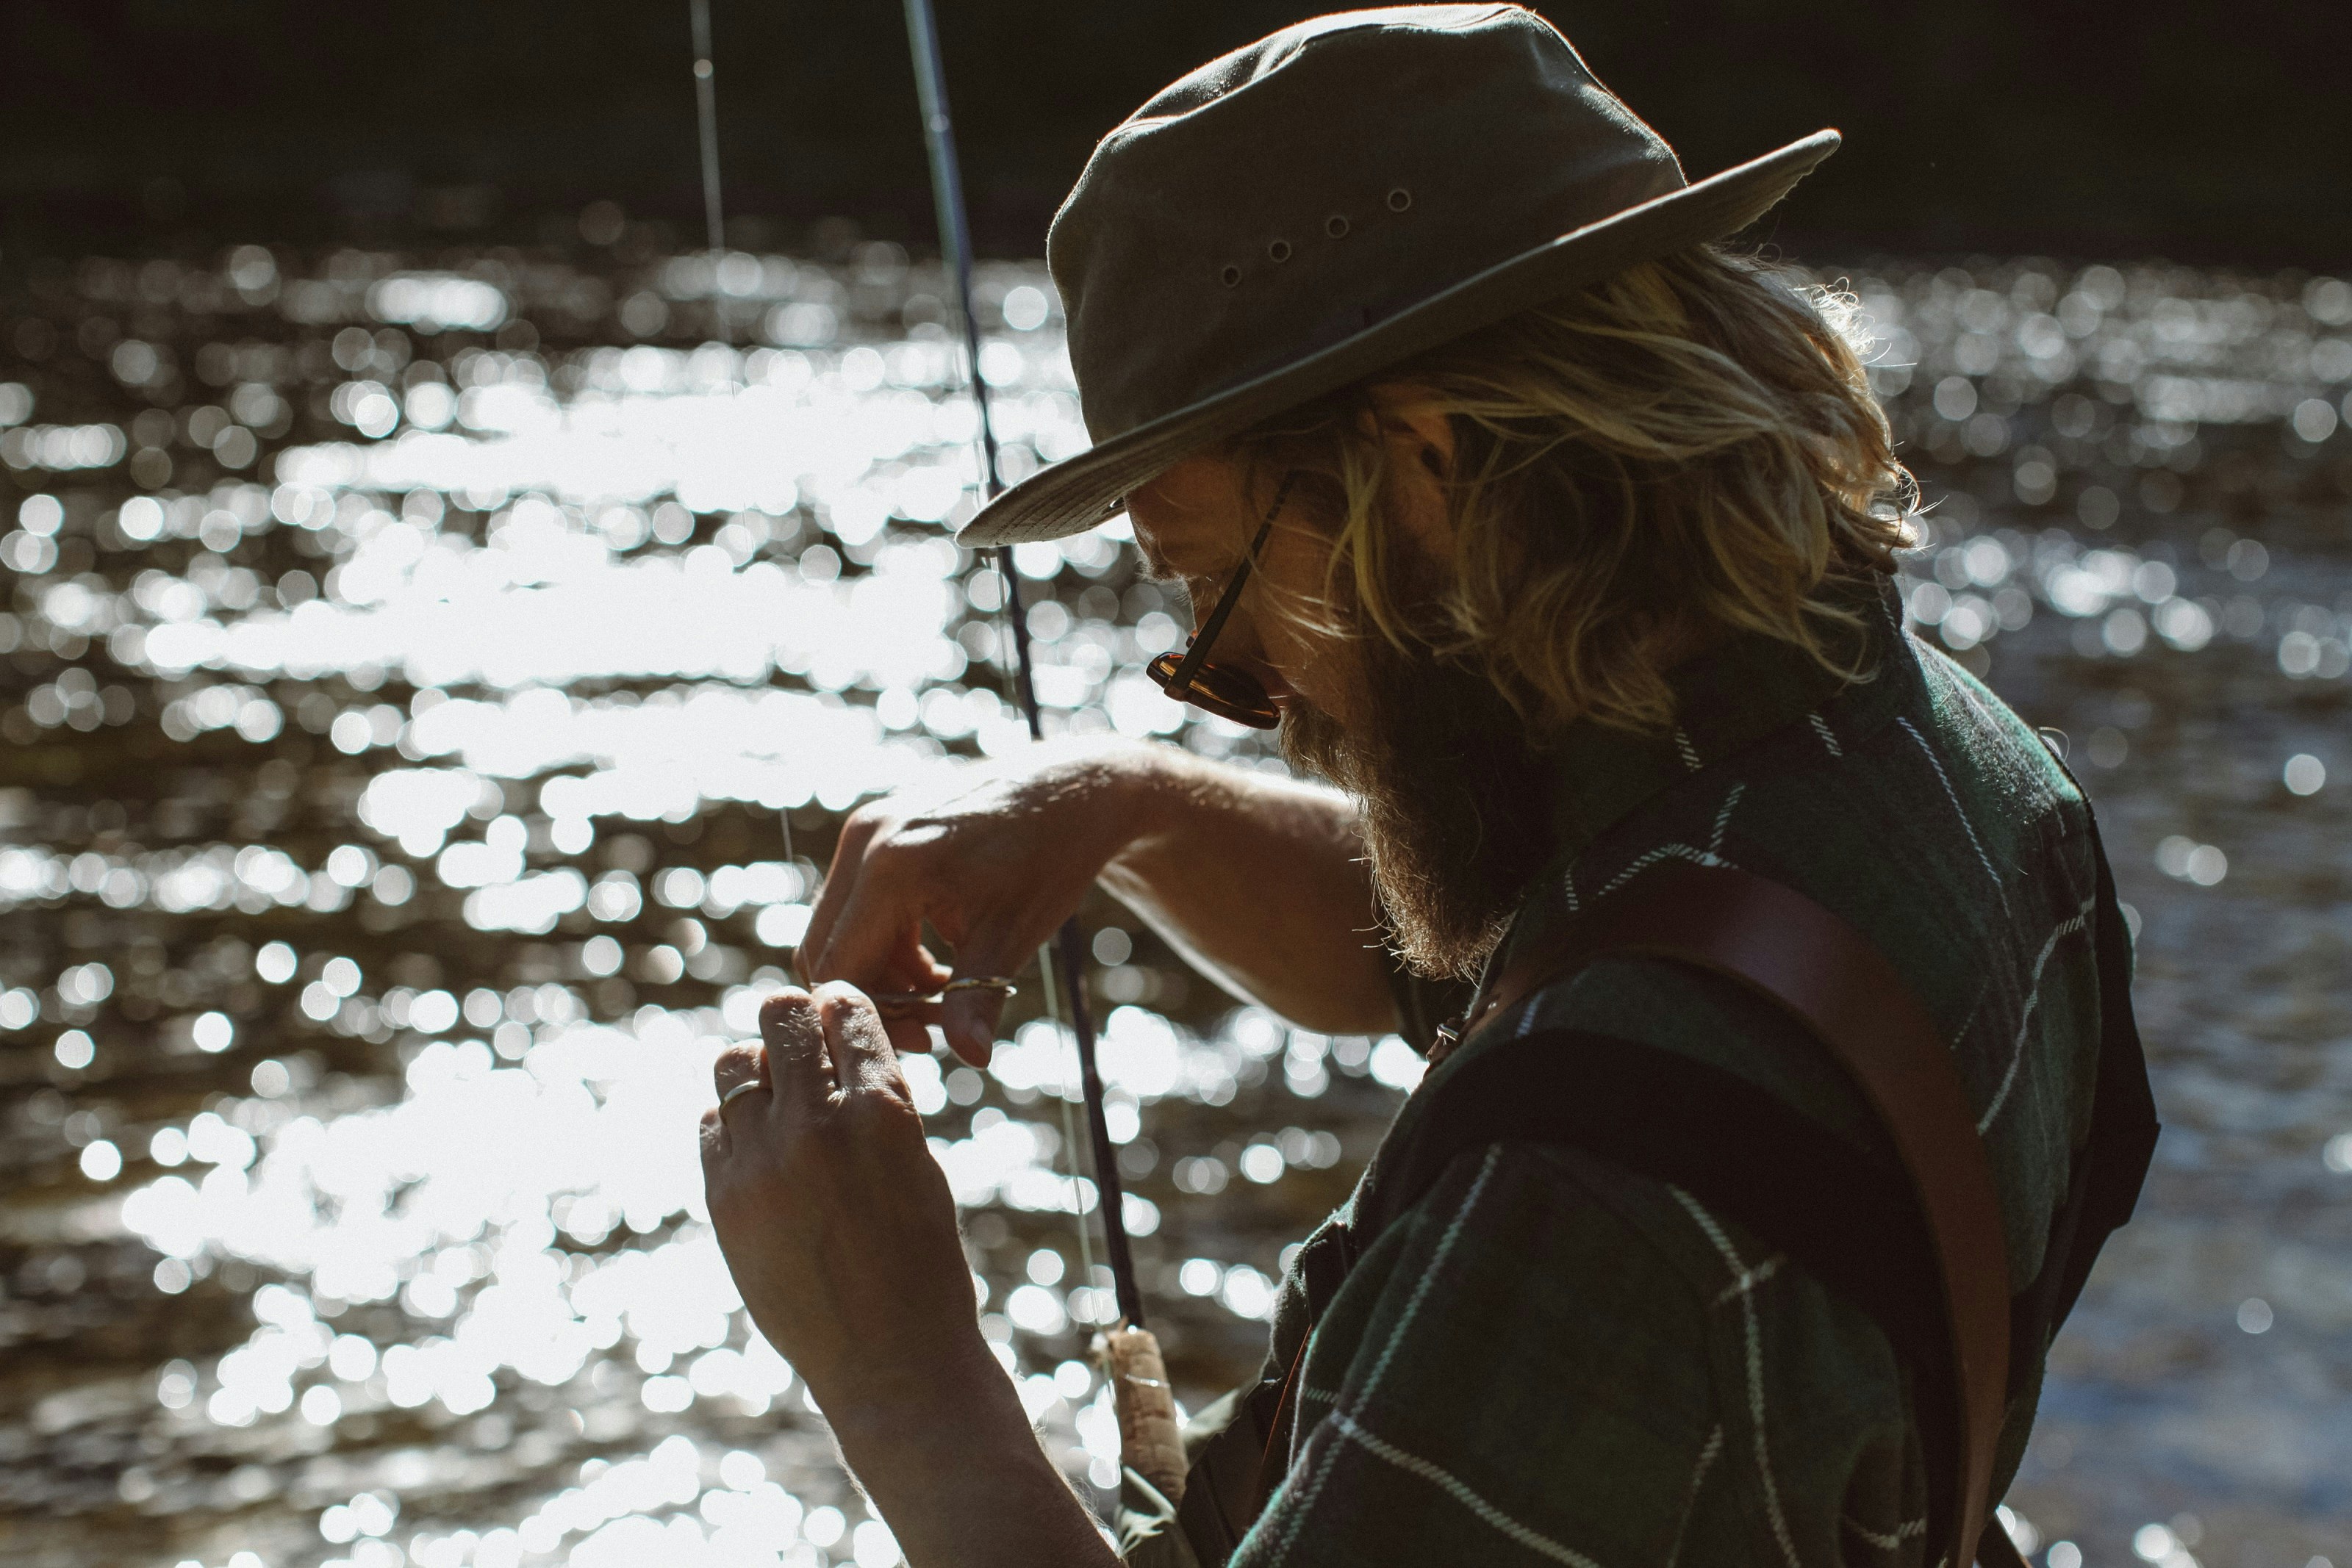 A man with long hair and sunglasses hooks a fly to his fishing rod while standing on the banks of a river. It's sunny and the sun is reflected in the waters of the river.